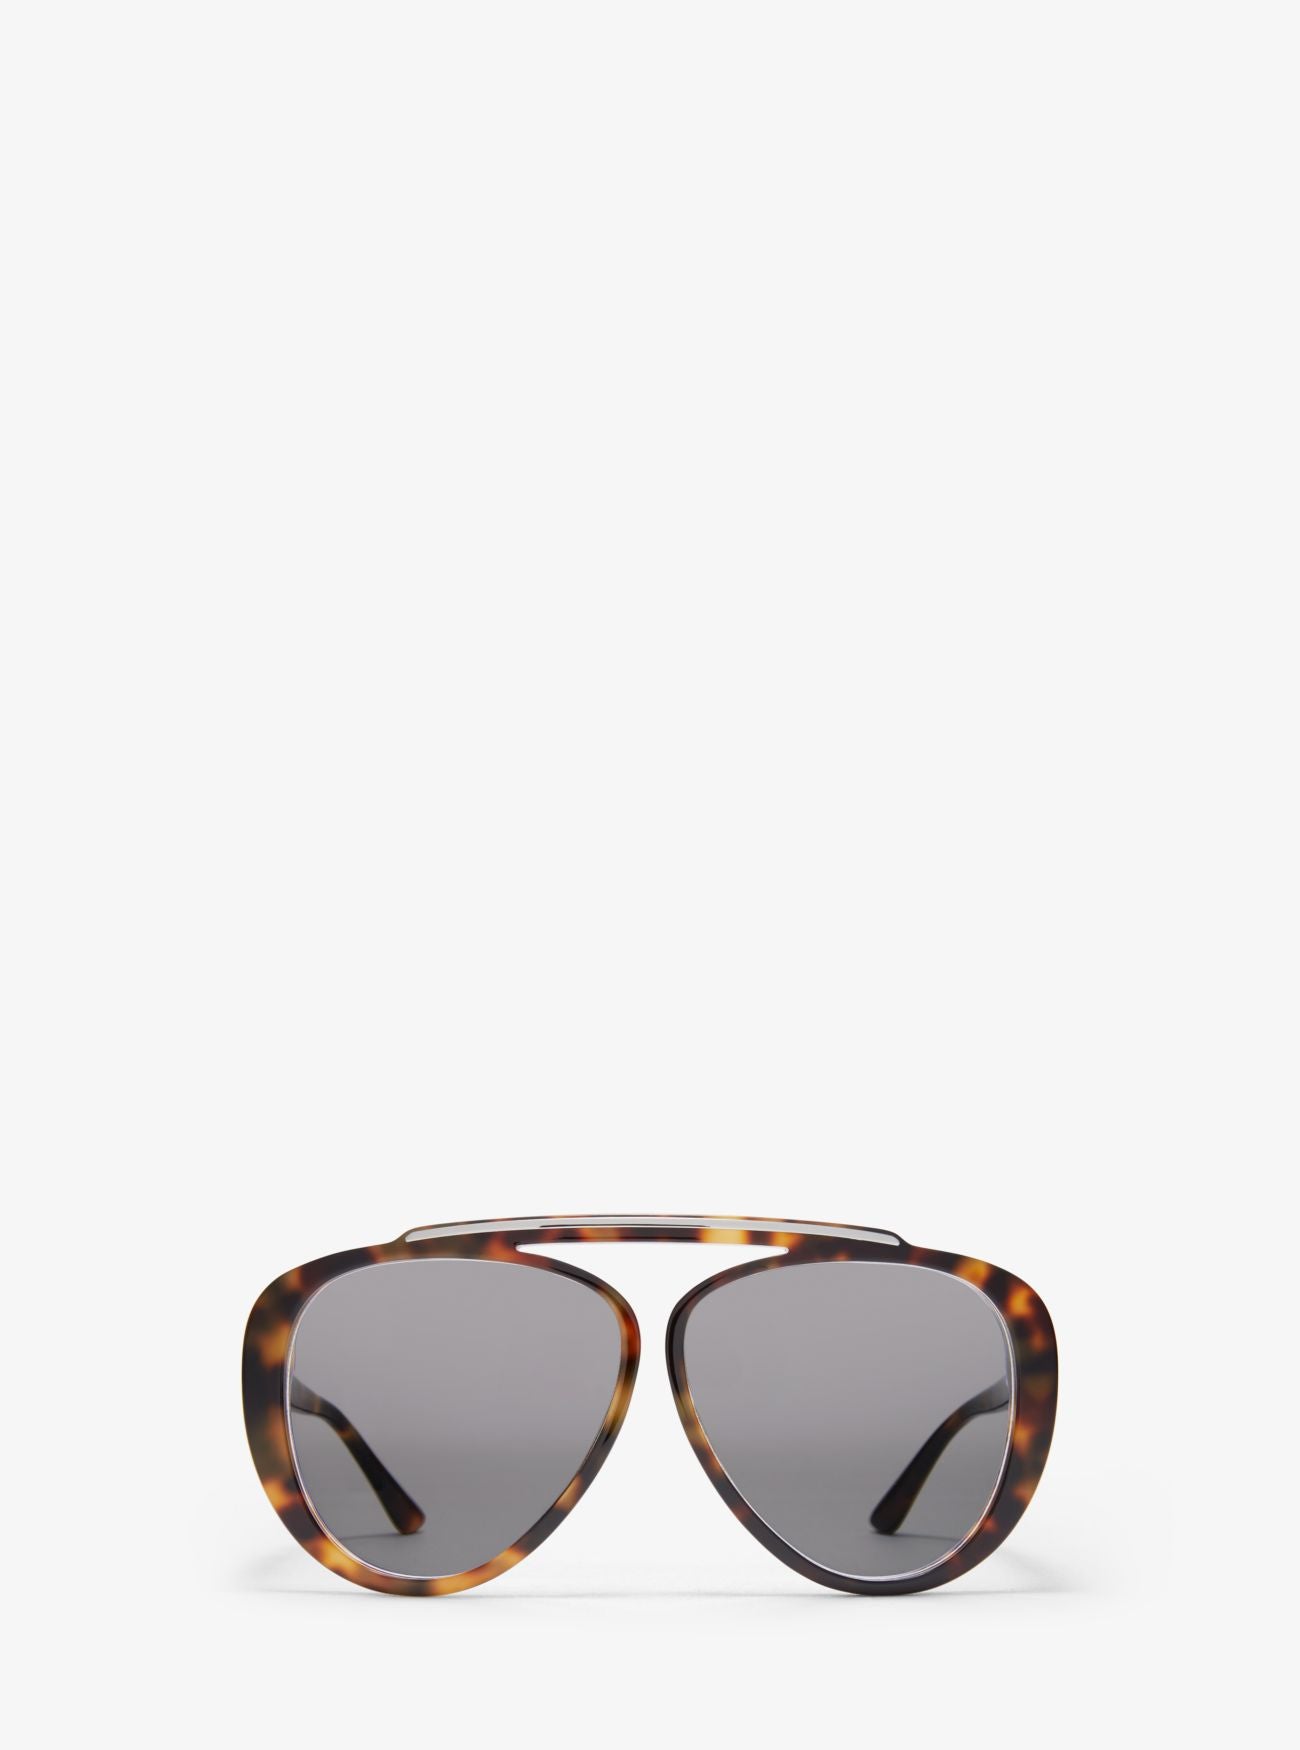 how much are michael kors sunglasses